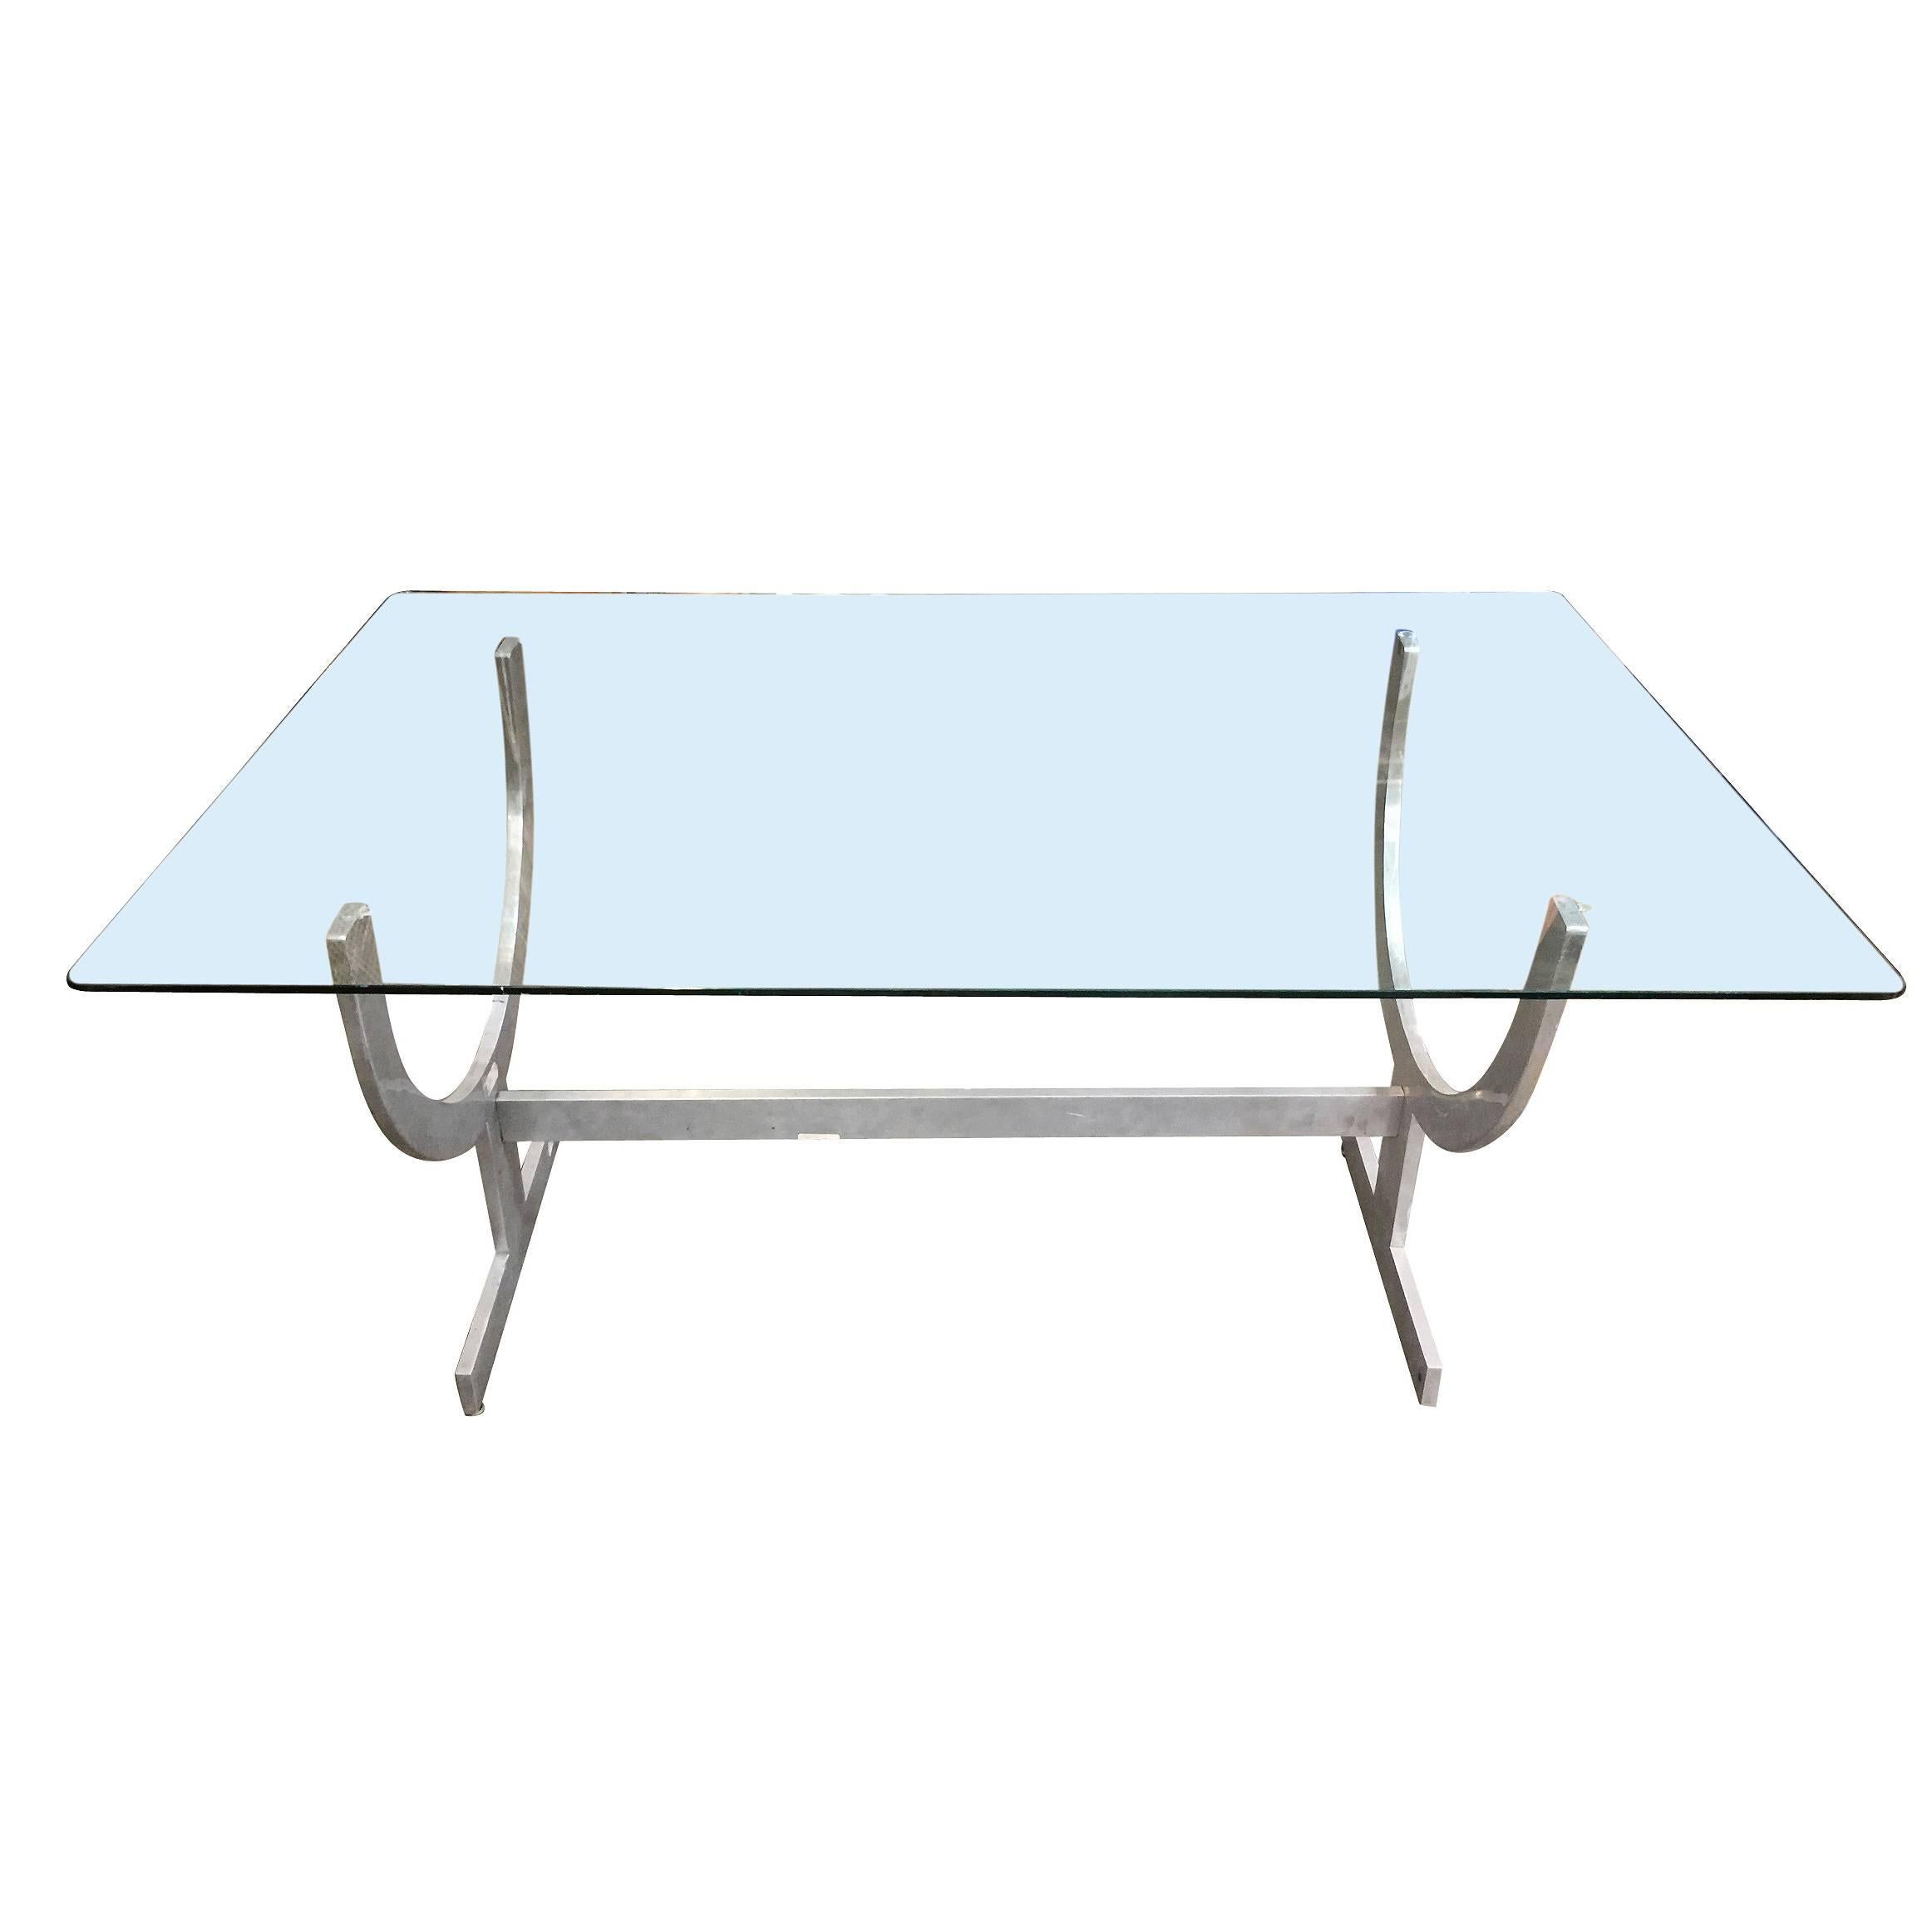 Custom-built Modernist dining table with a machined aluminum base. Perfect for the Futurist and Modernist setting. The table would work well as a large desk. 

  